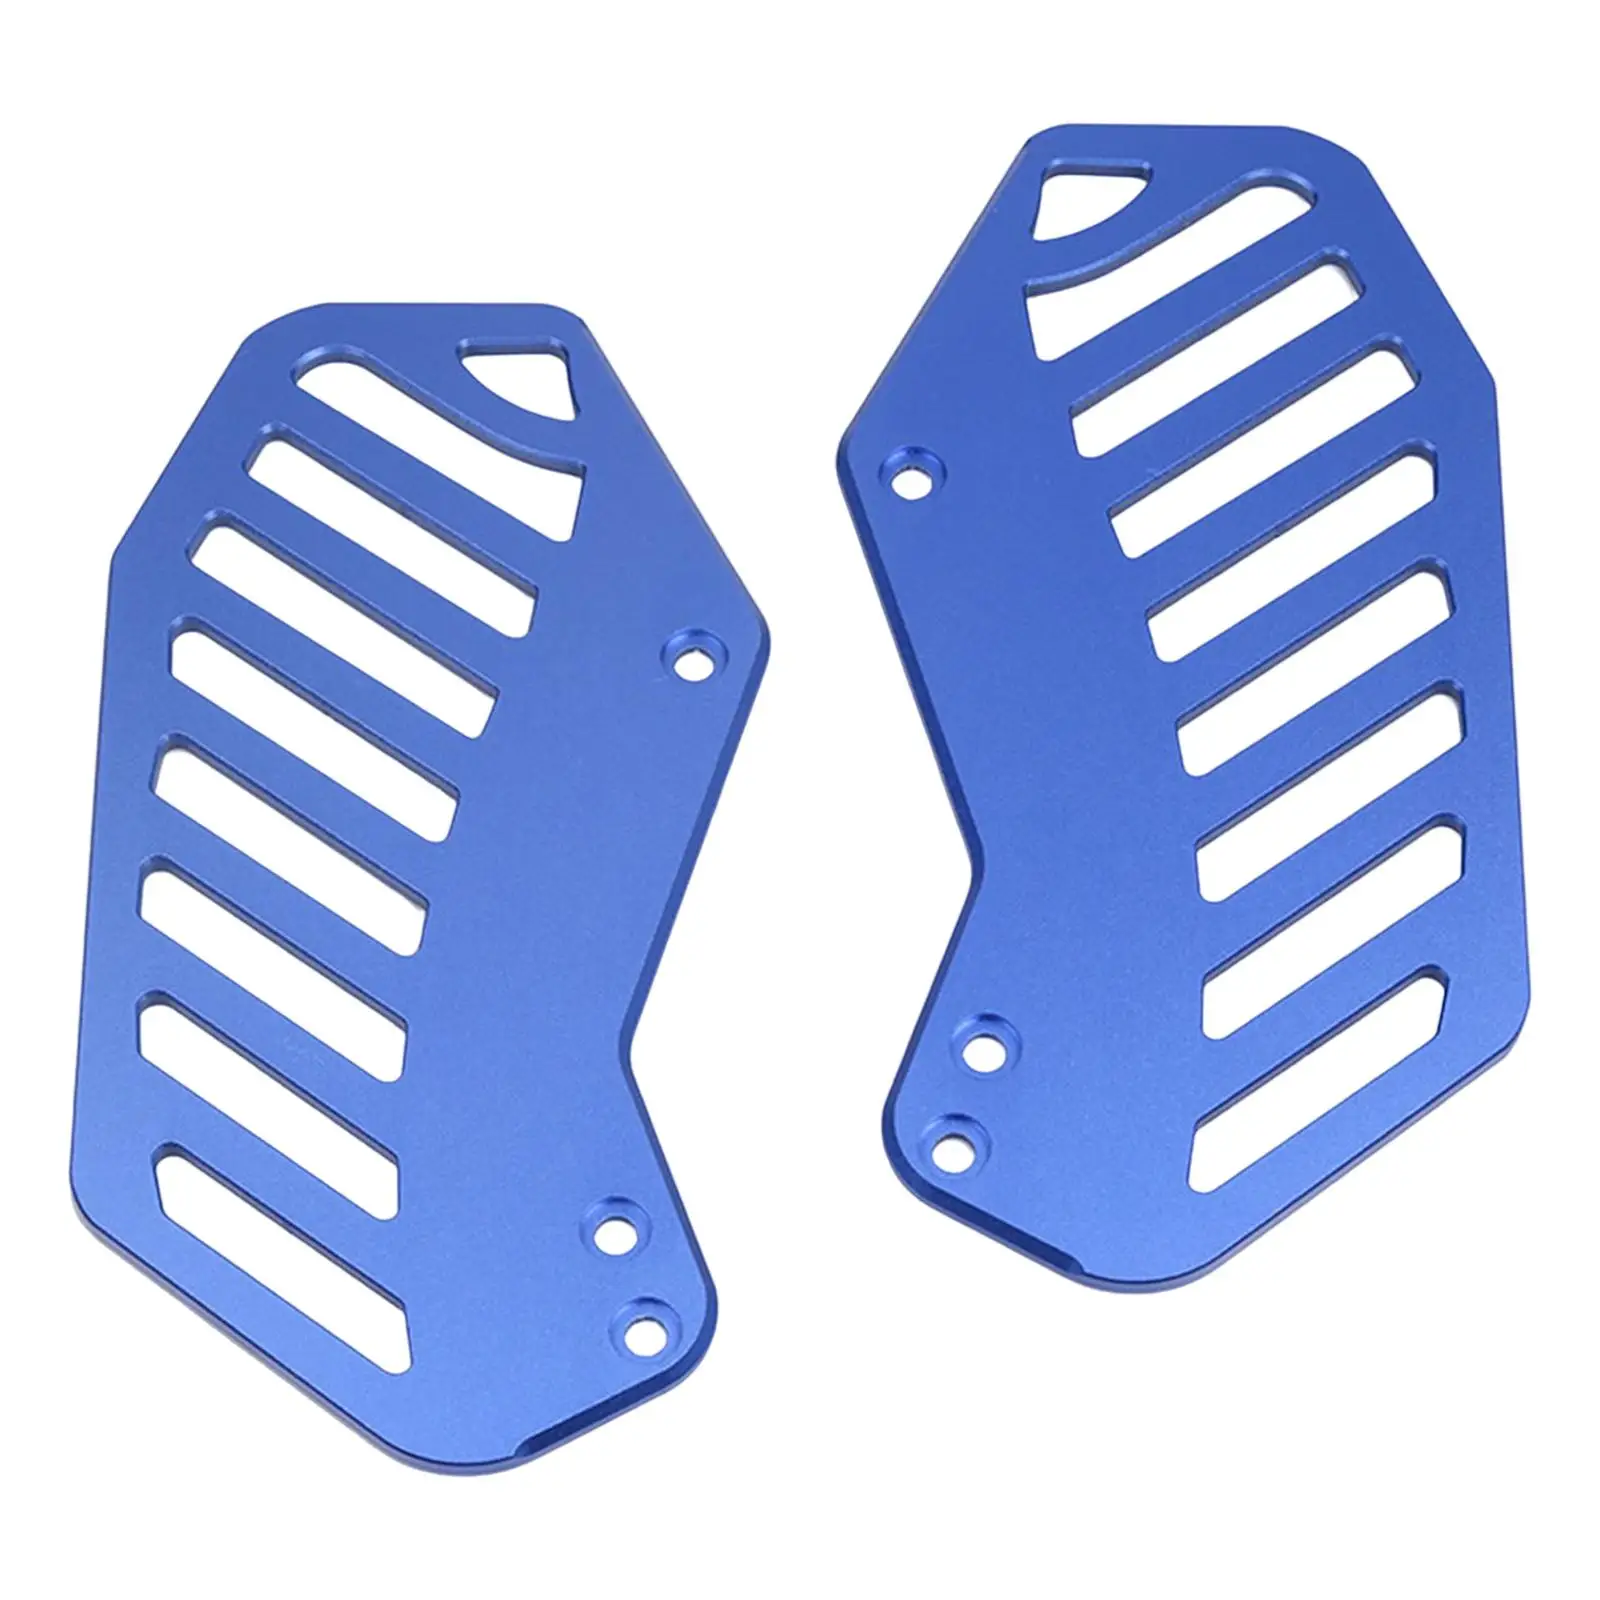 2x Electrocar Front Foot Pedals Pads for Premium Spare Parts